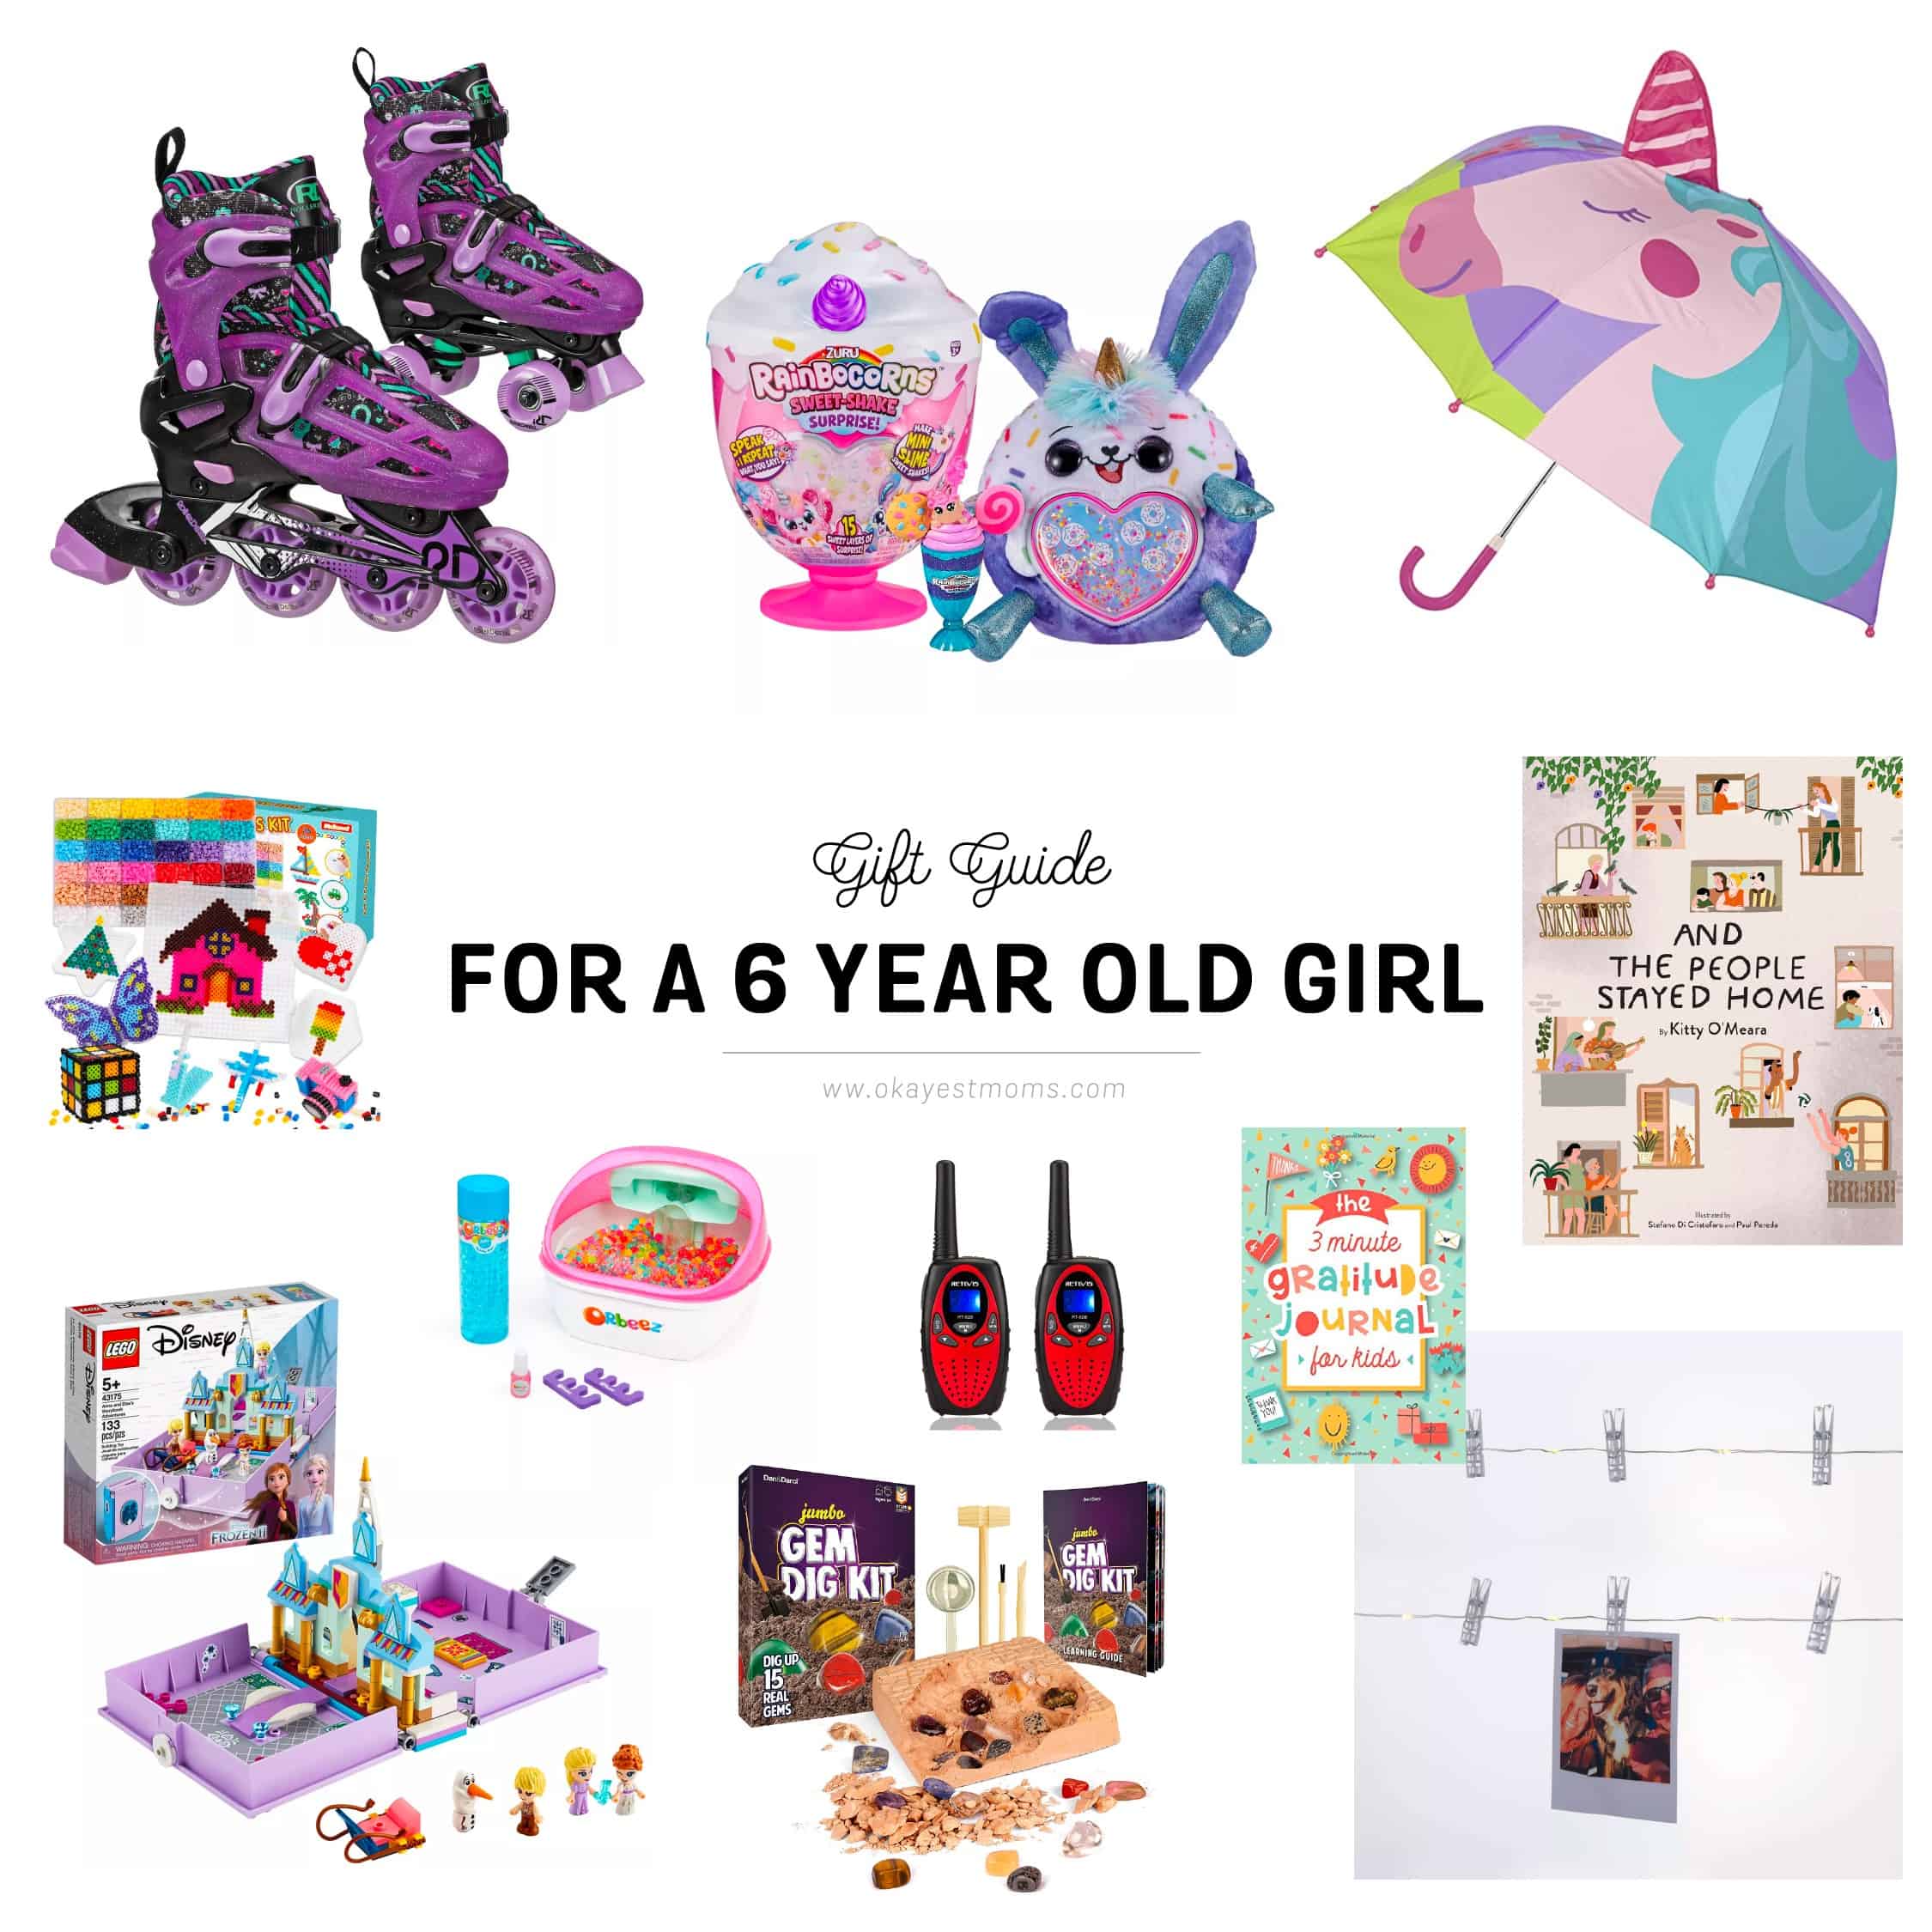 Holiday Shopping: 6 Year Old Girl Gift Ideas â Okayest Moms